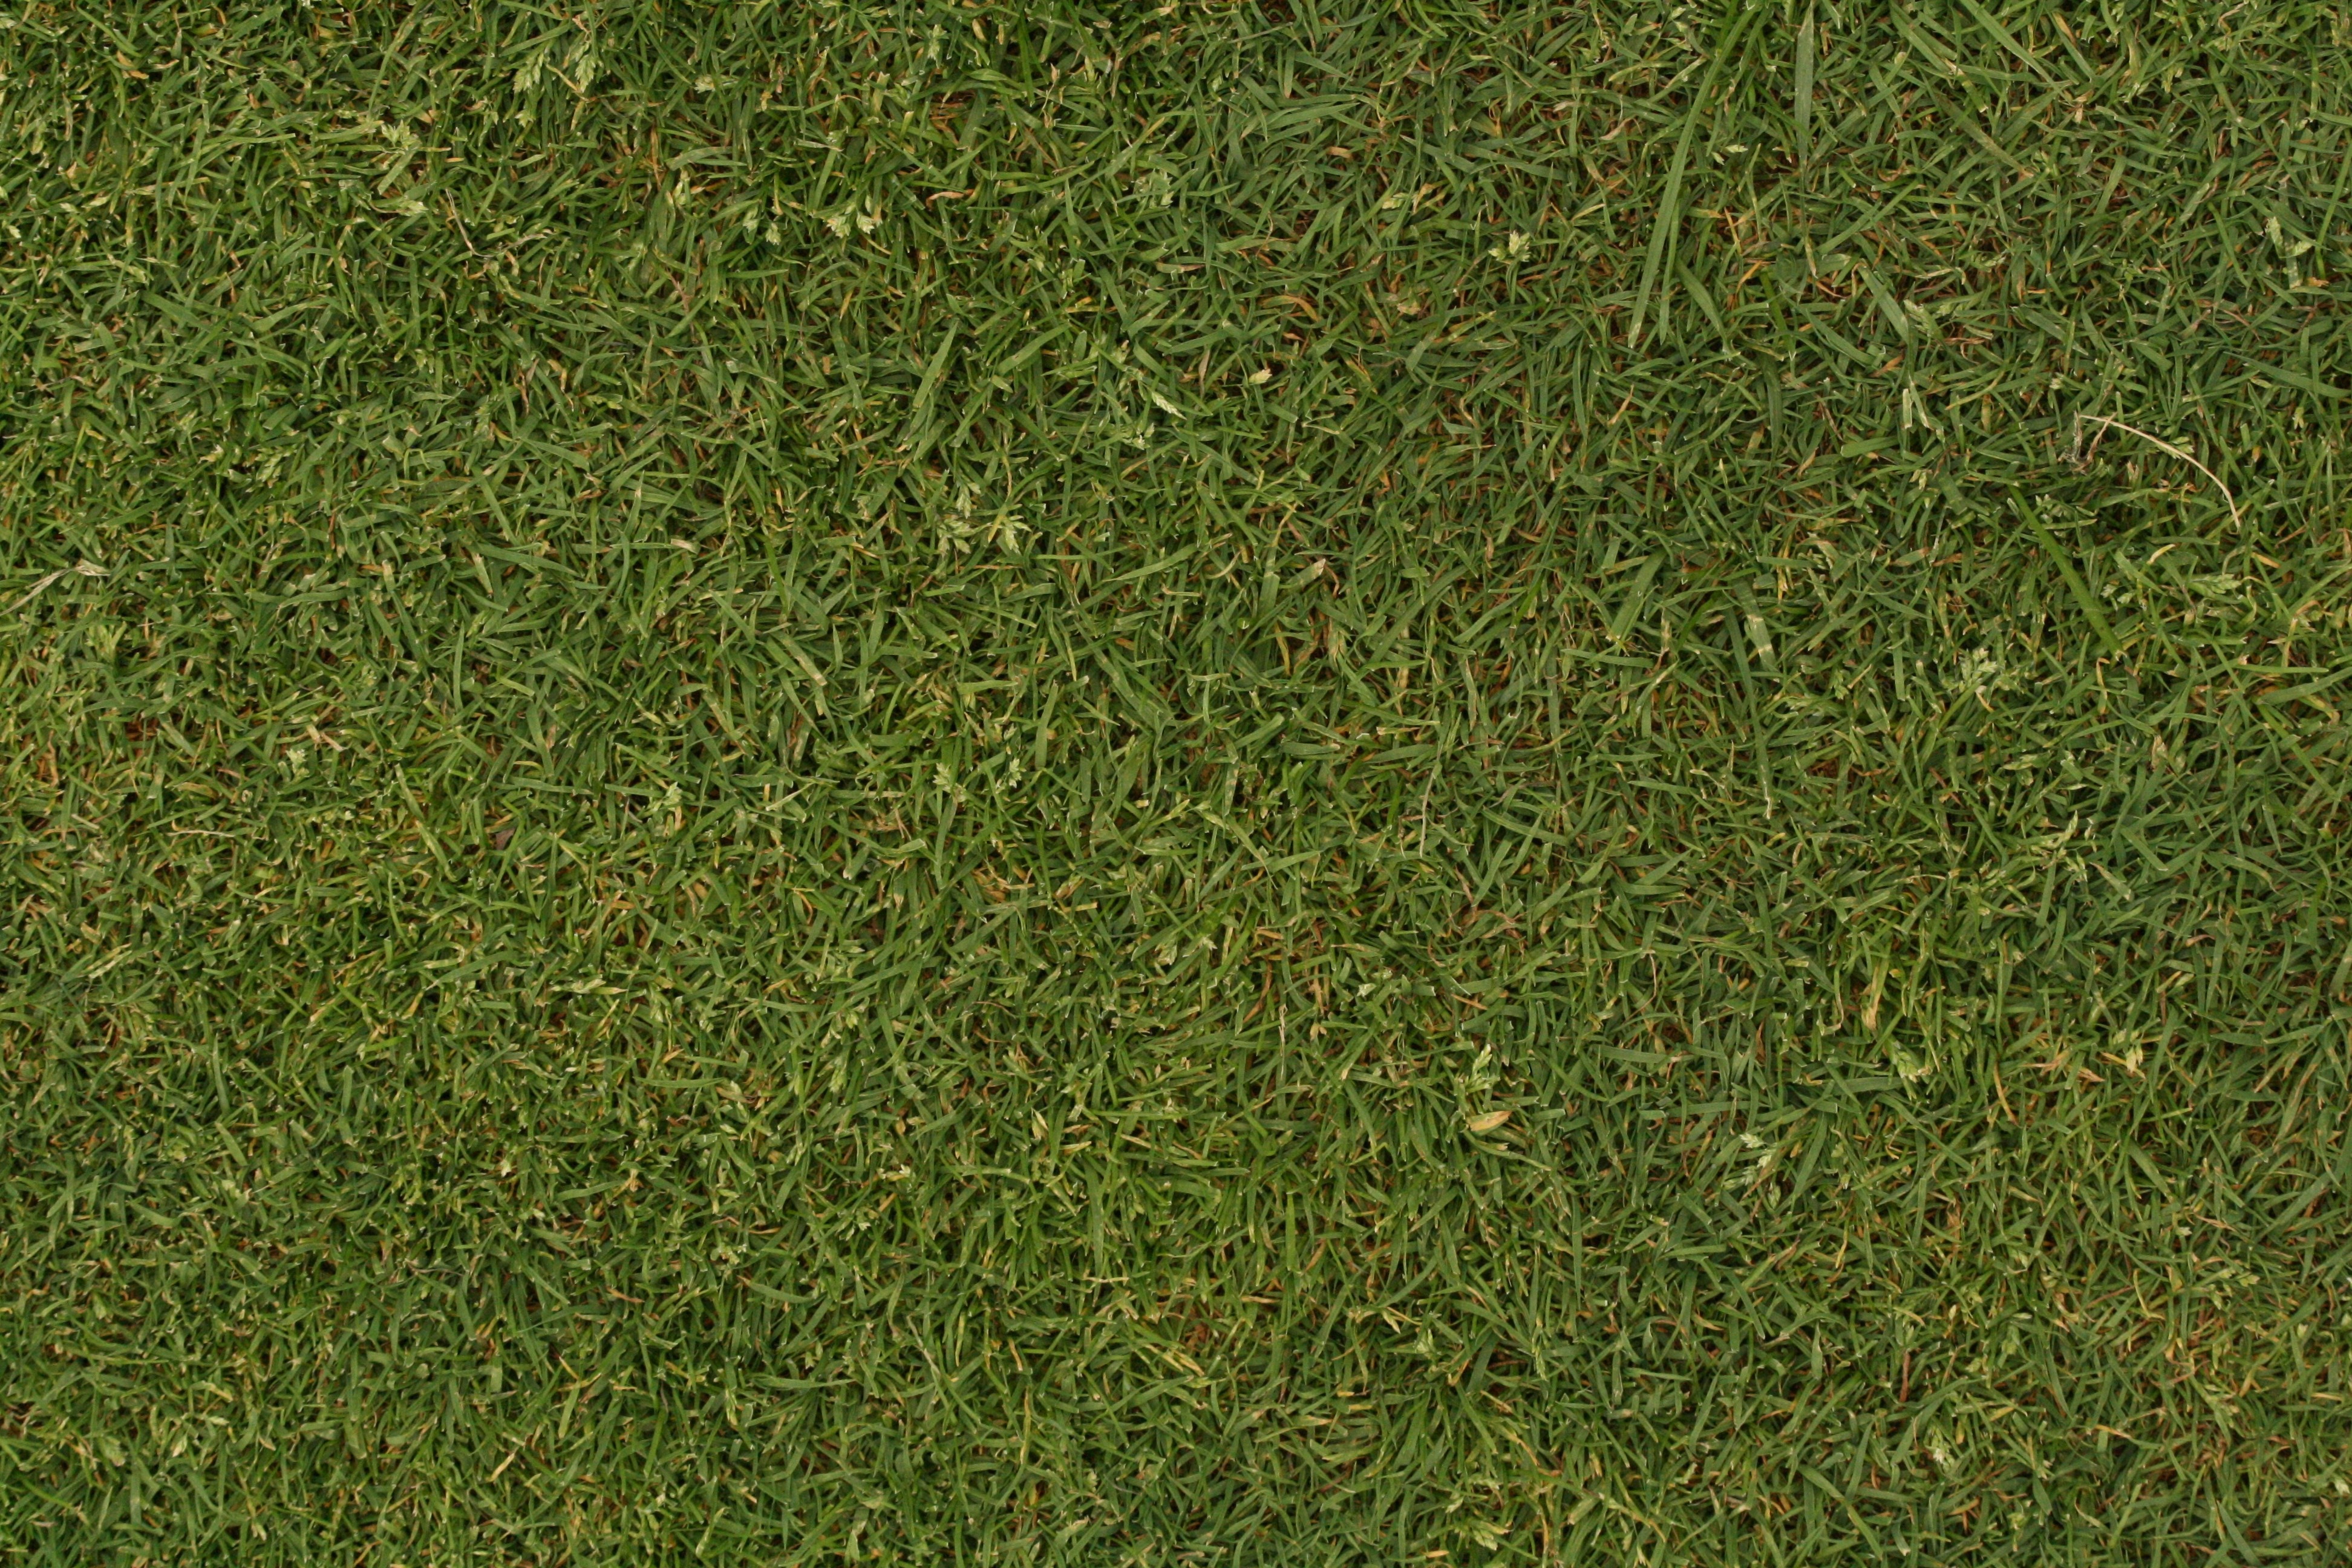 Free Photo Grass Texture Rough Rural Seamless Non Commercial Free Download Jooinn 